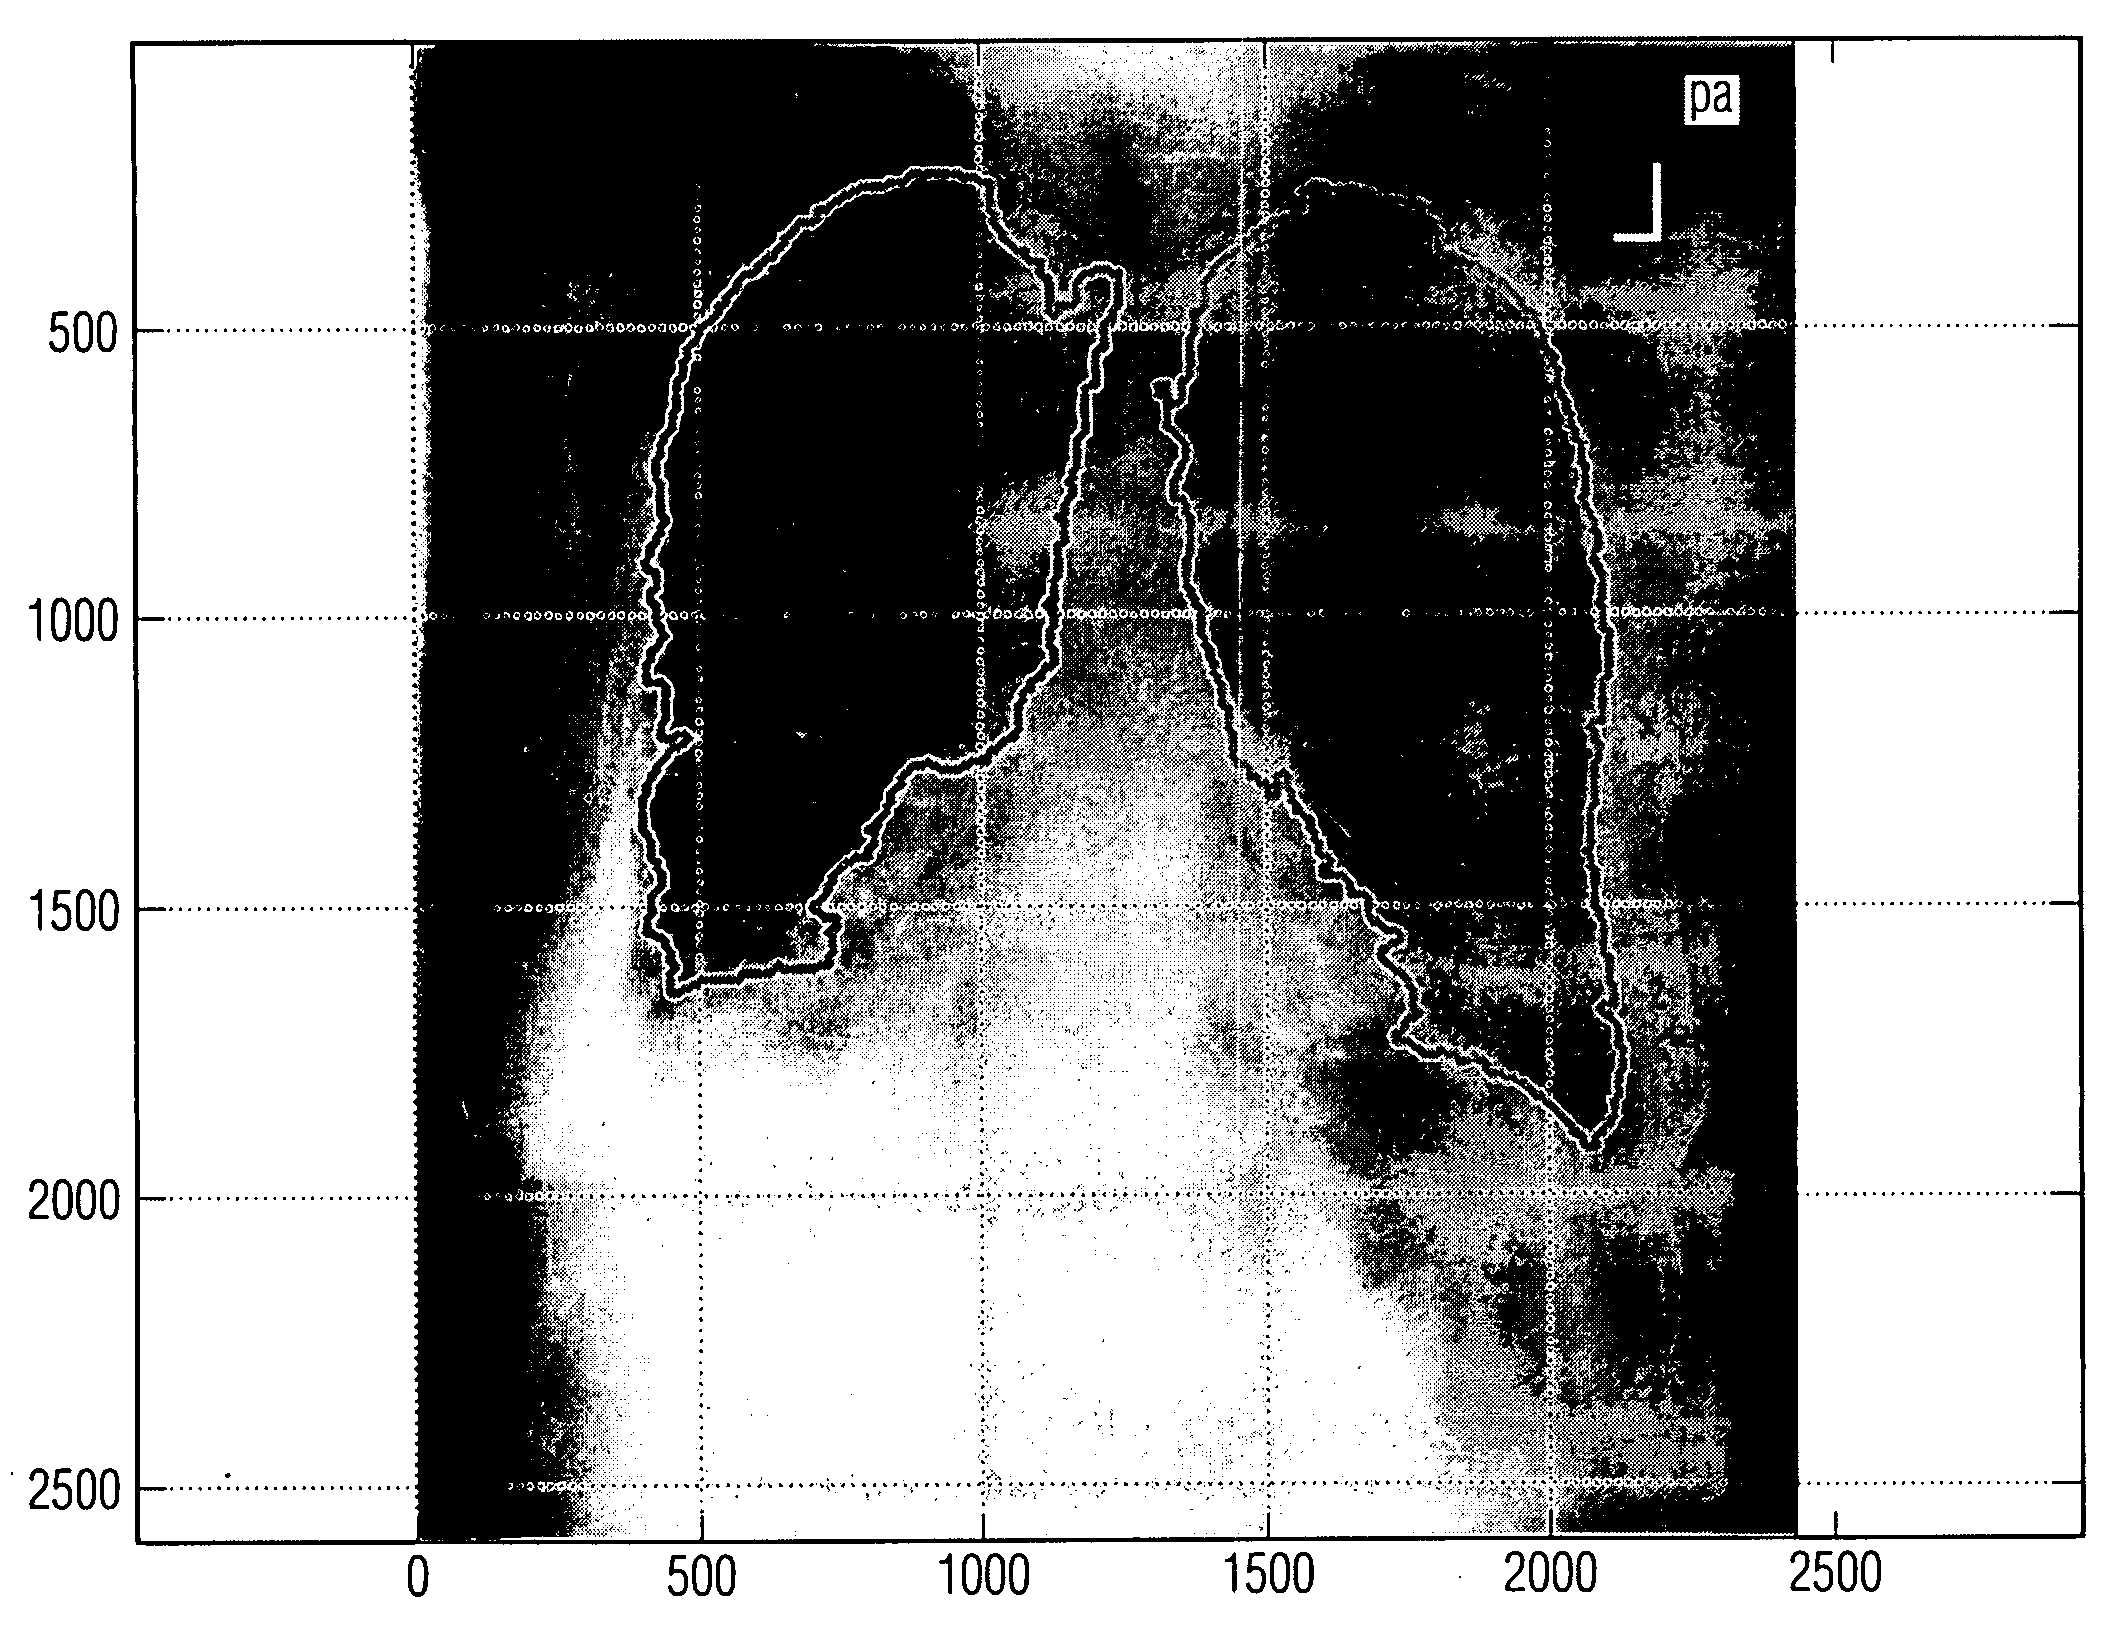 Method of suppressing obscuring features in an image